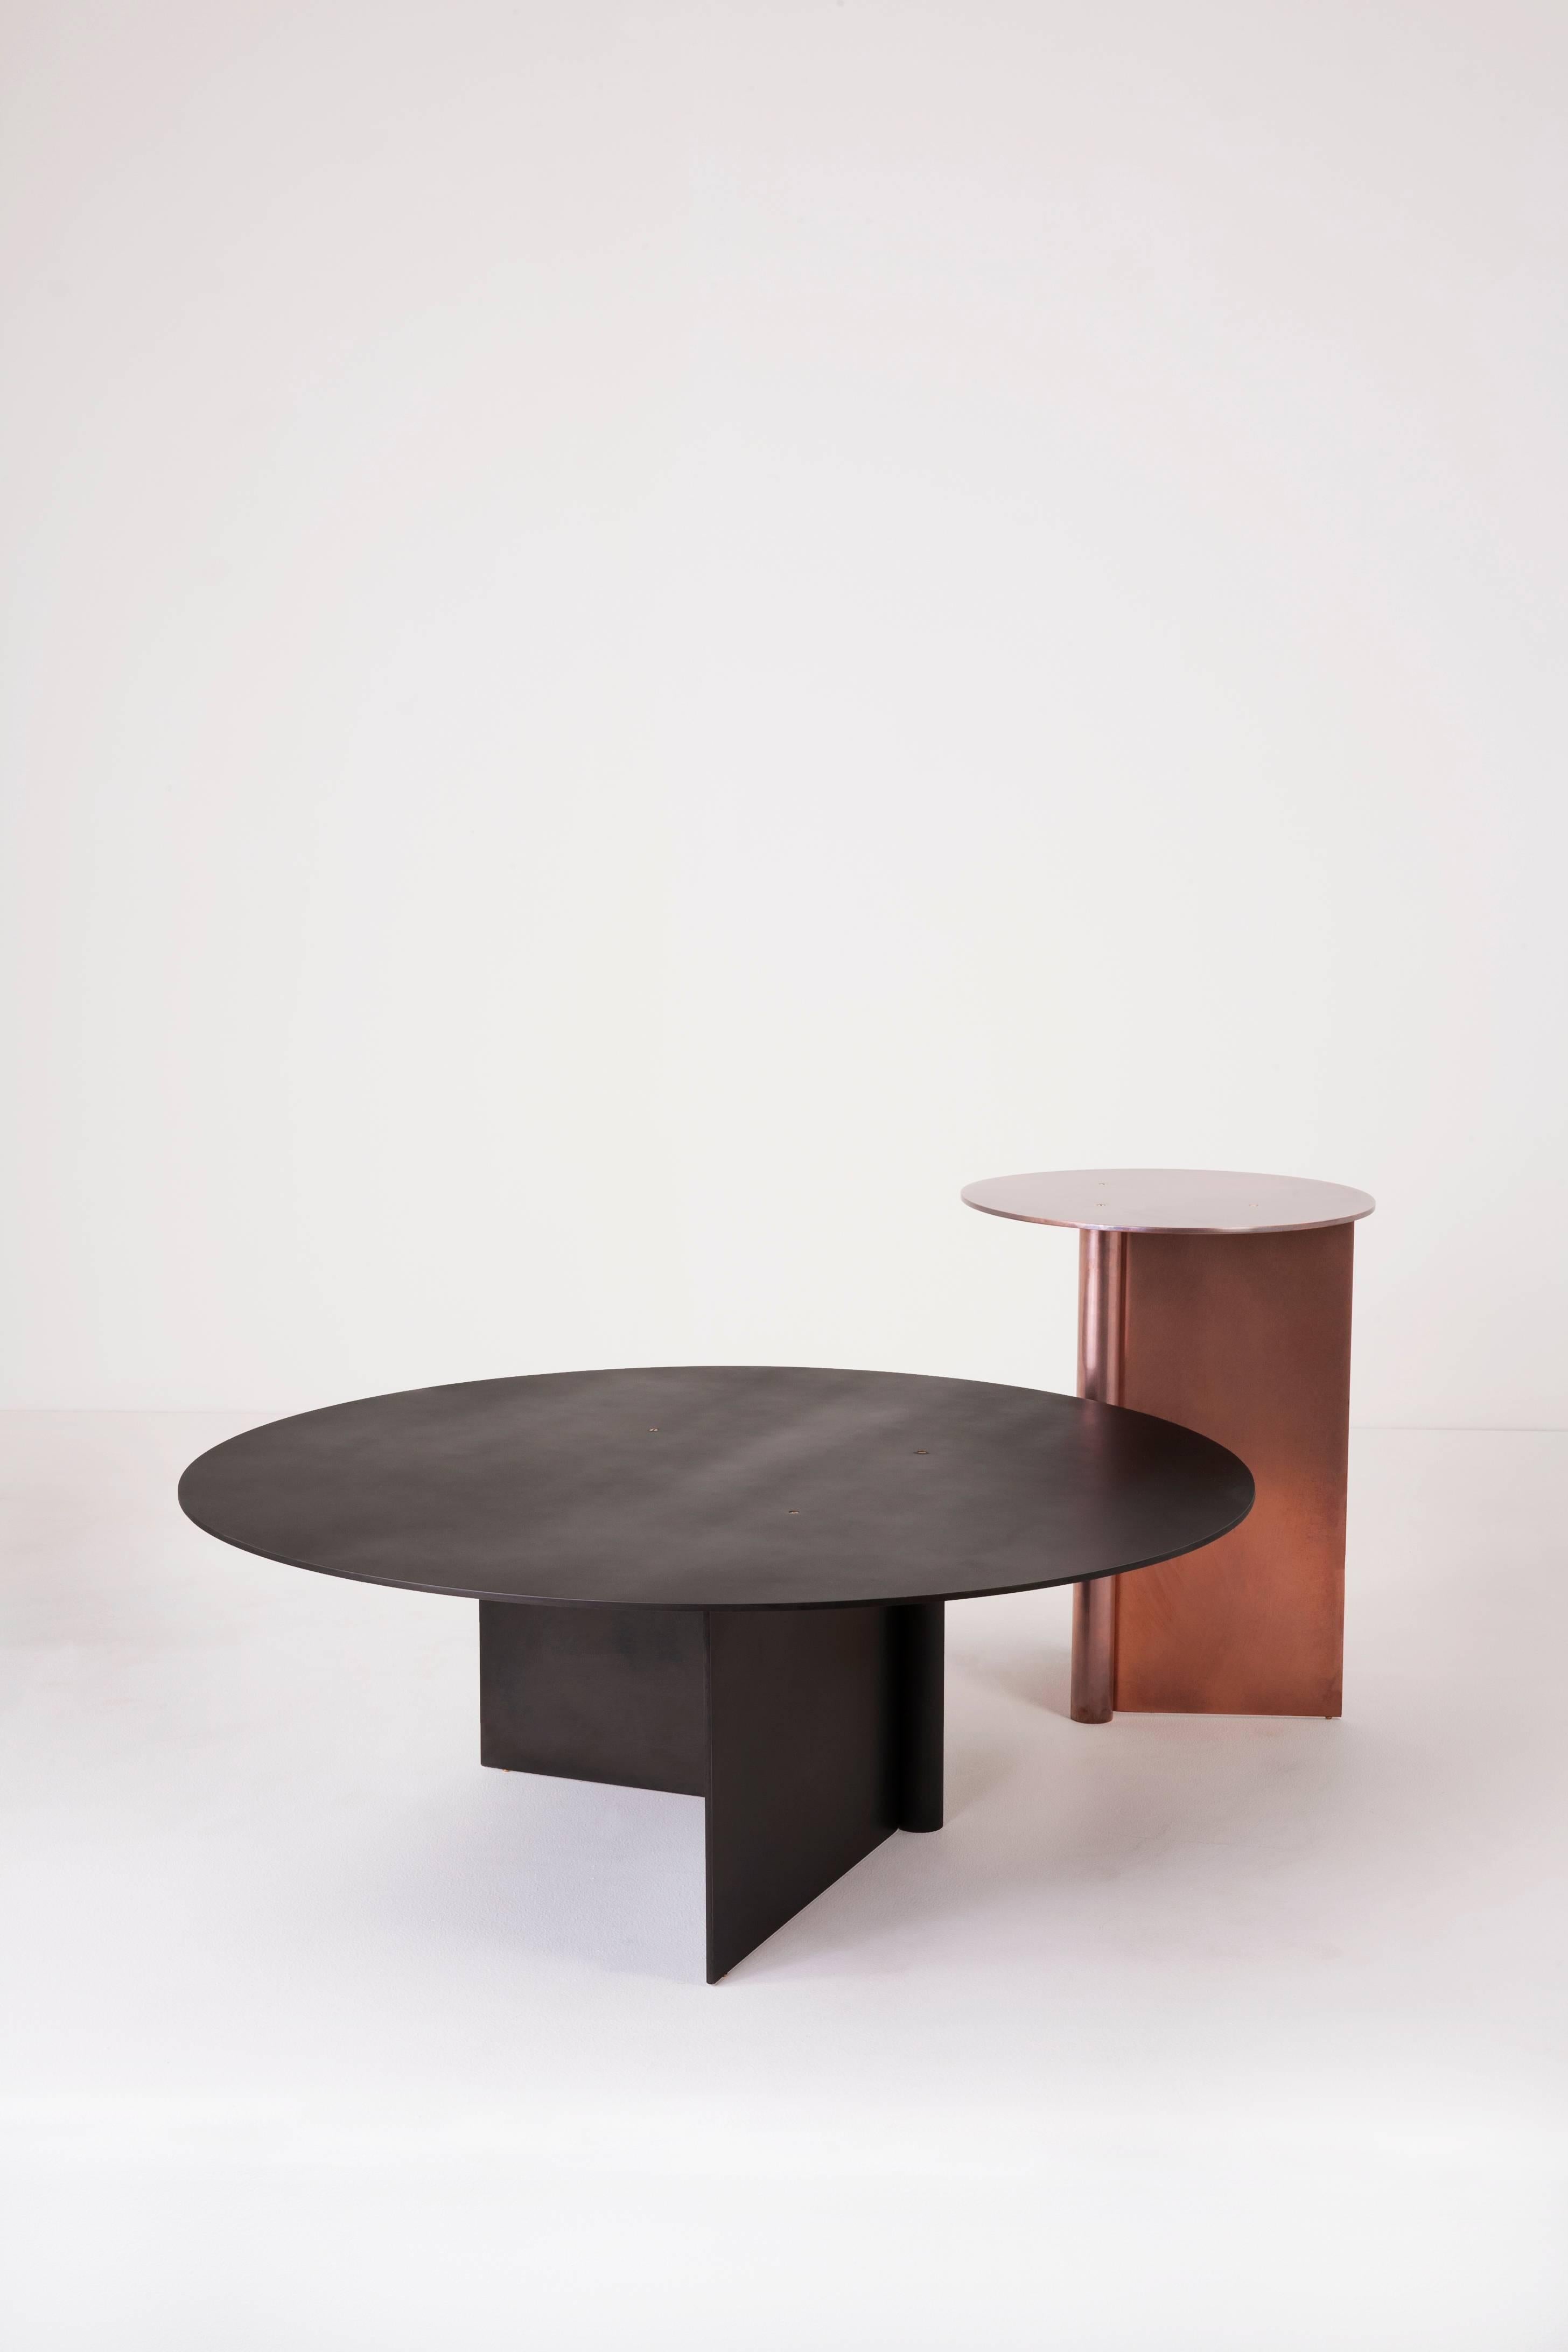 Os Table Large I in Matte Aluminium, Blackened, and Satin Brass (Minimalistisch)